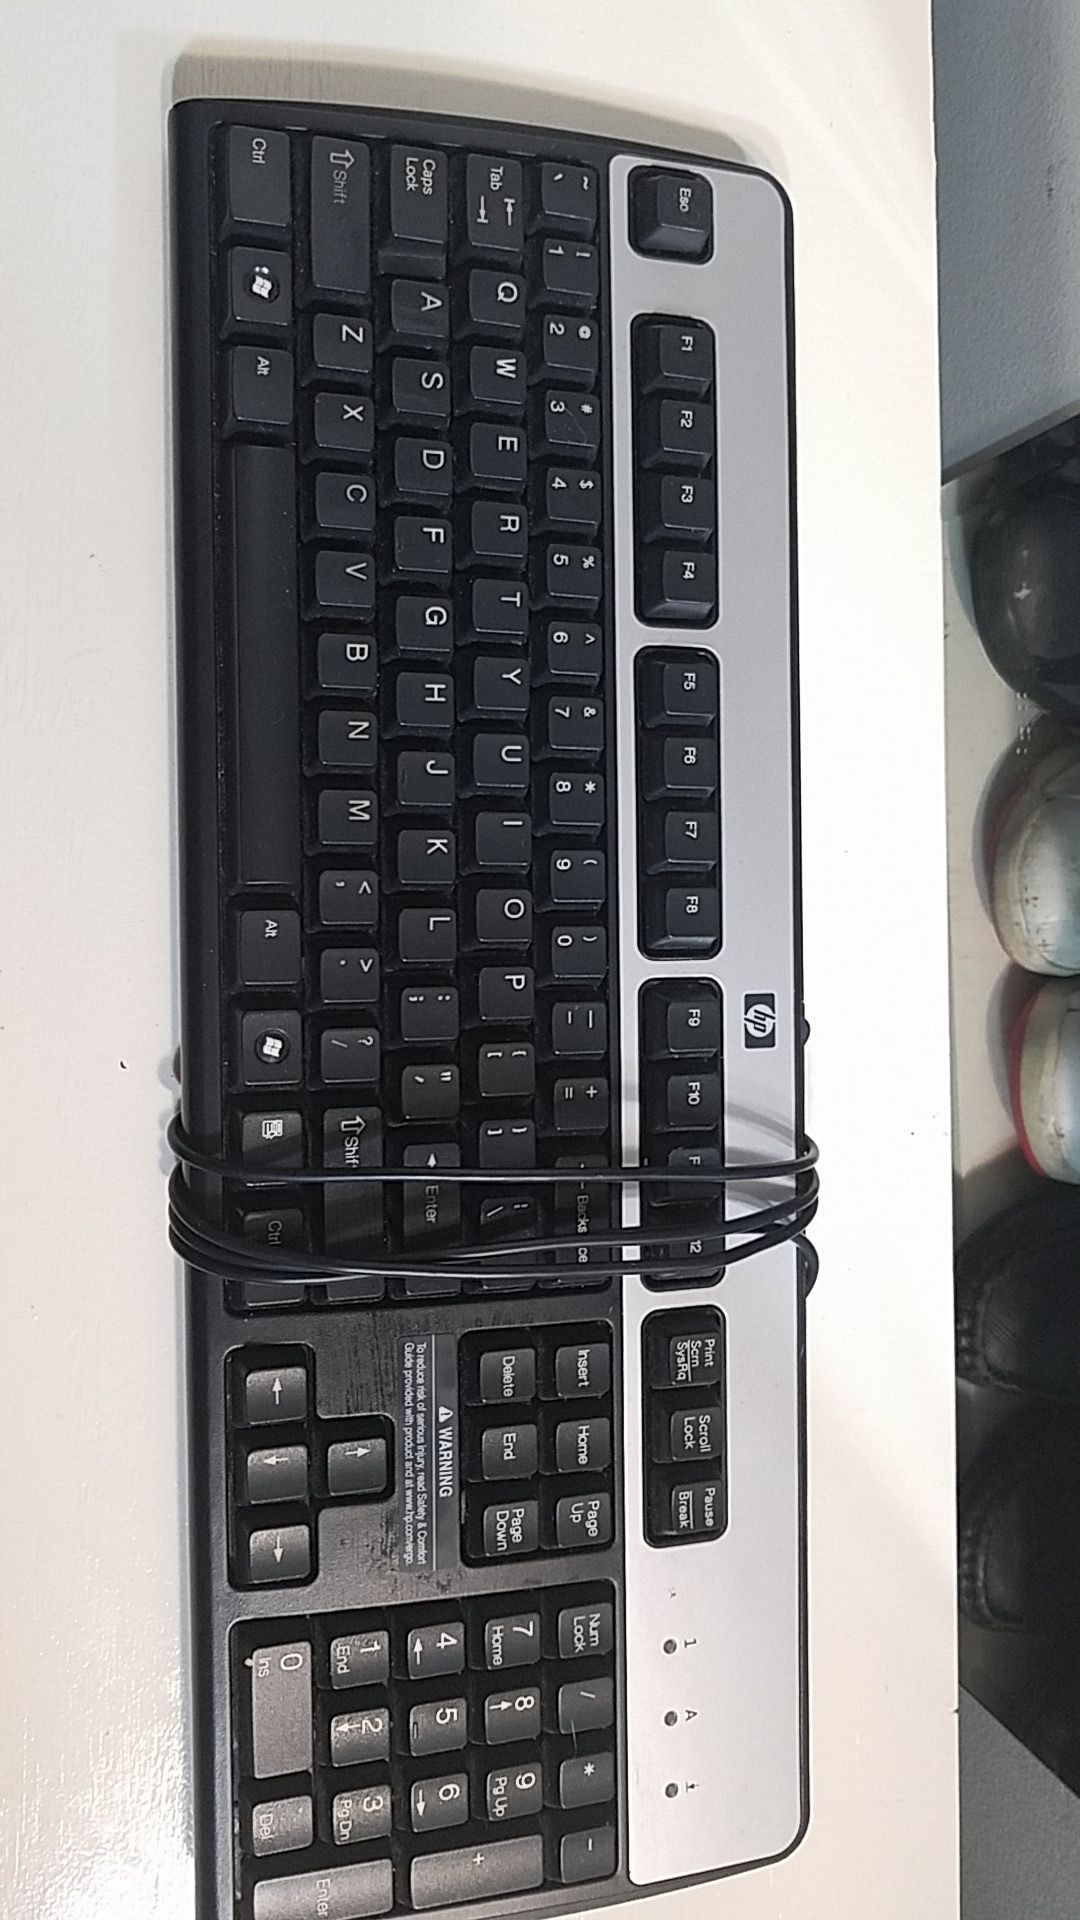 Keyboard that works really good